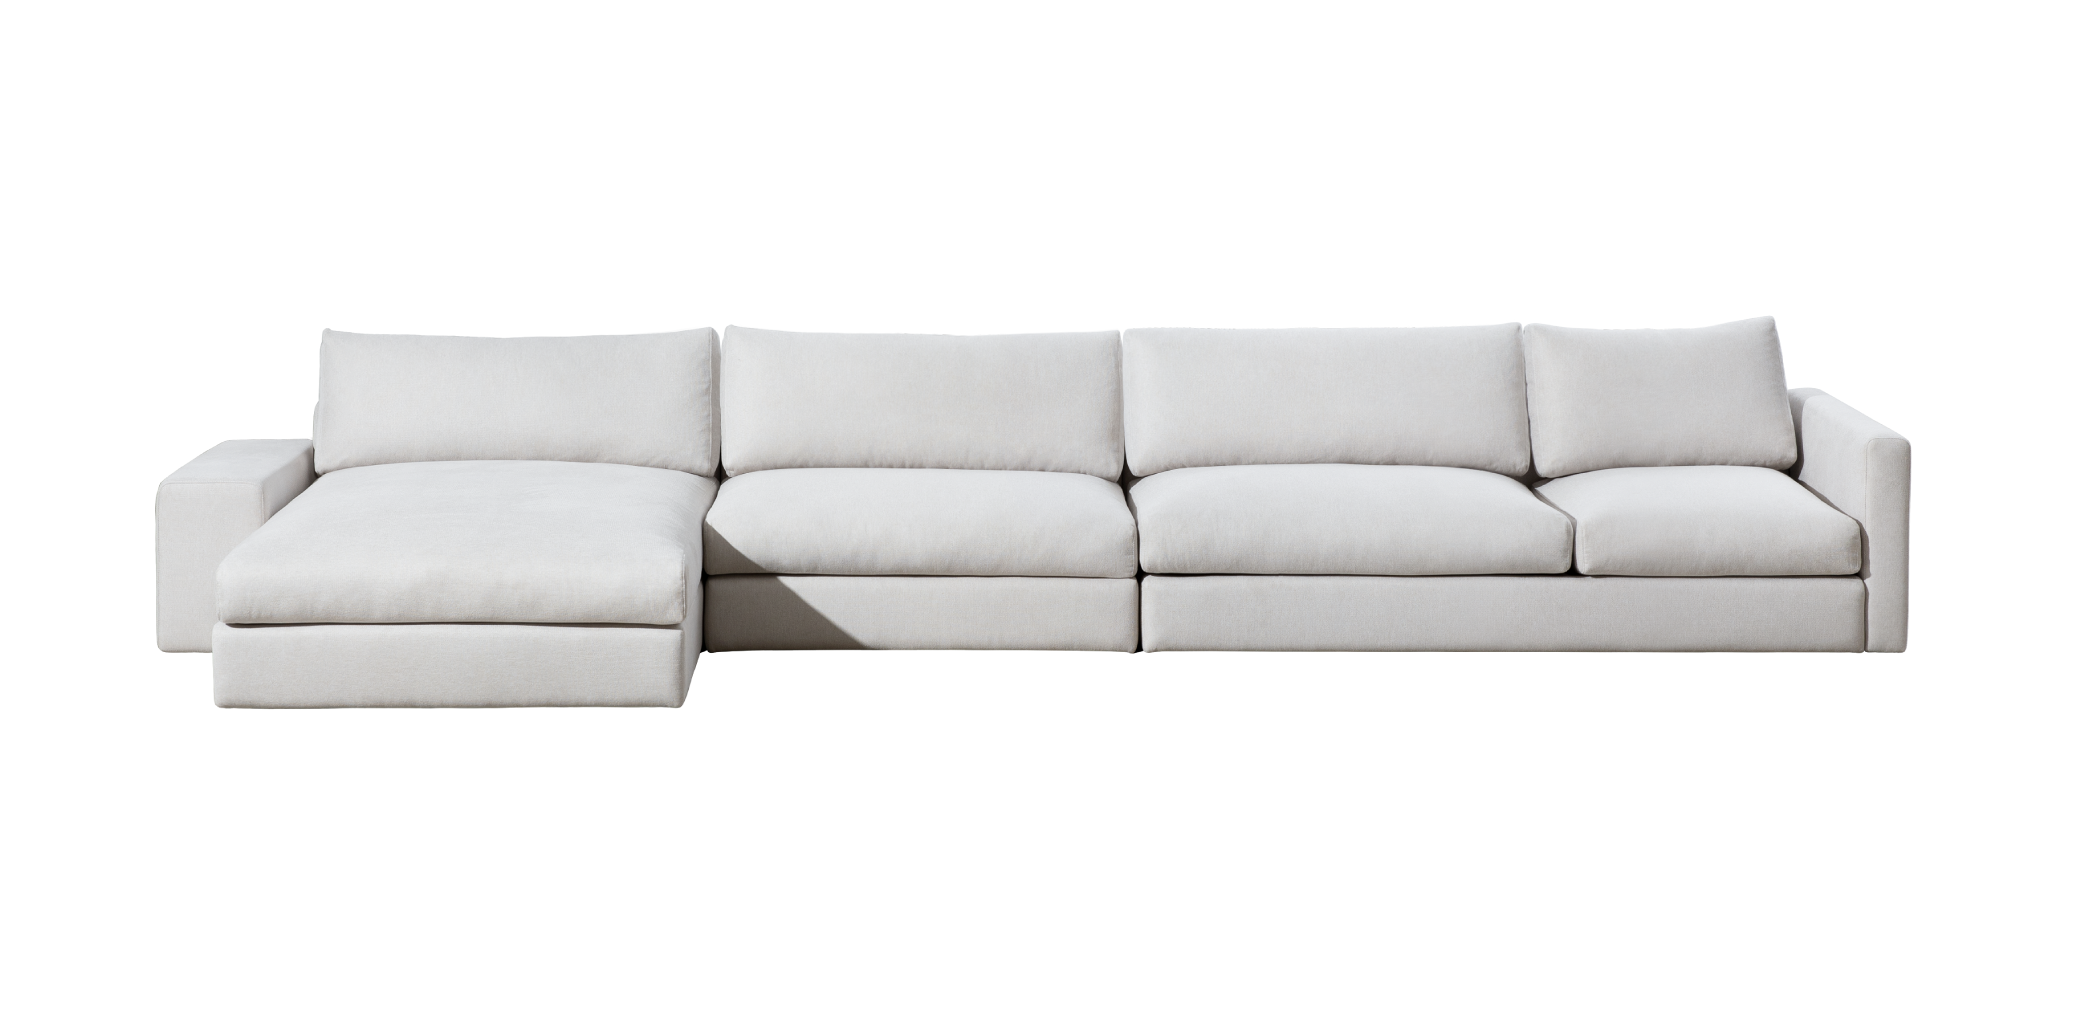 https://zerofurniture.vn/static/2973/2023/12/11/product_classic_4 seater_nsp.png